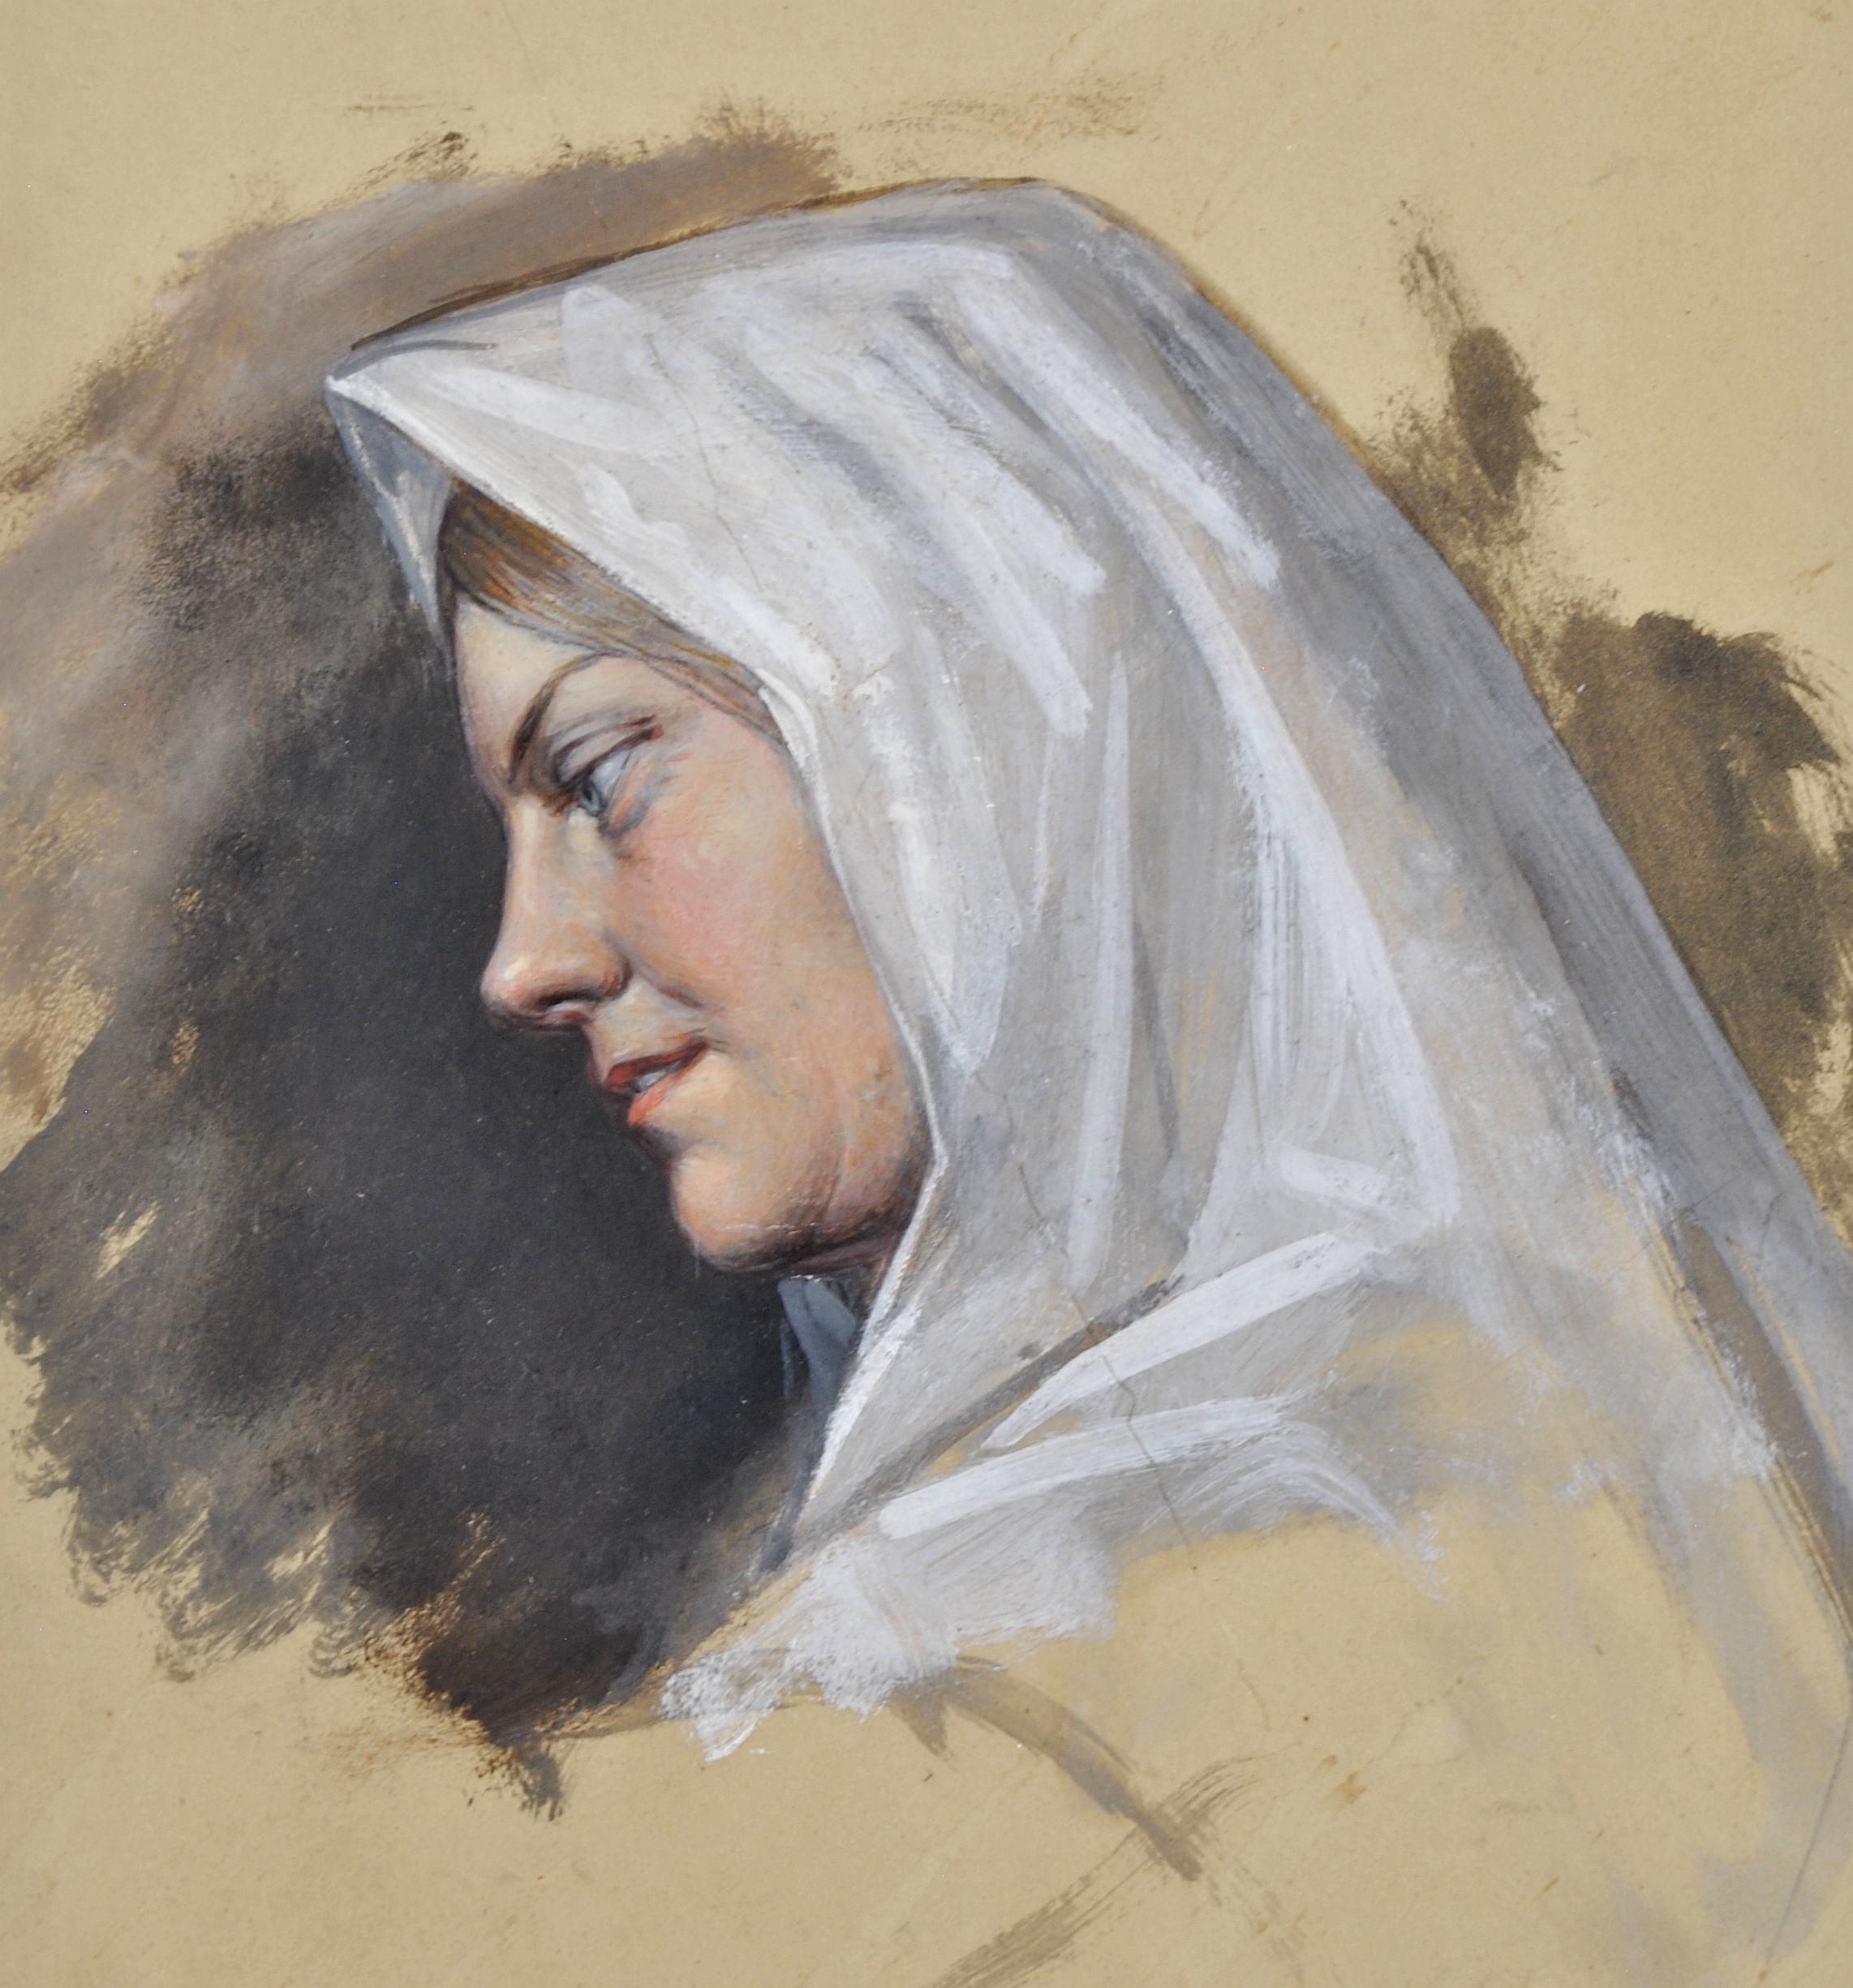 Lady in a White Shawl - 19th Century British Gouache Portrait Painting For Sale 2